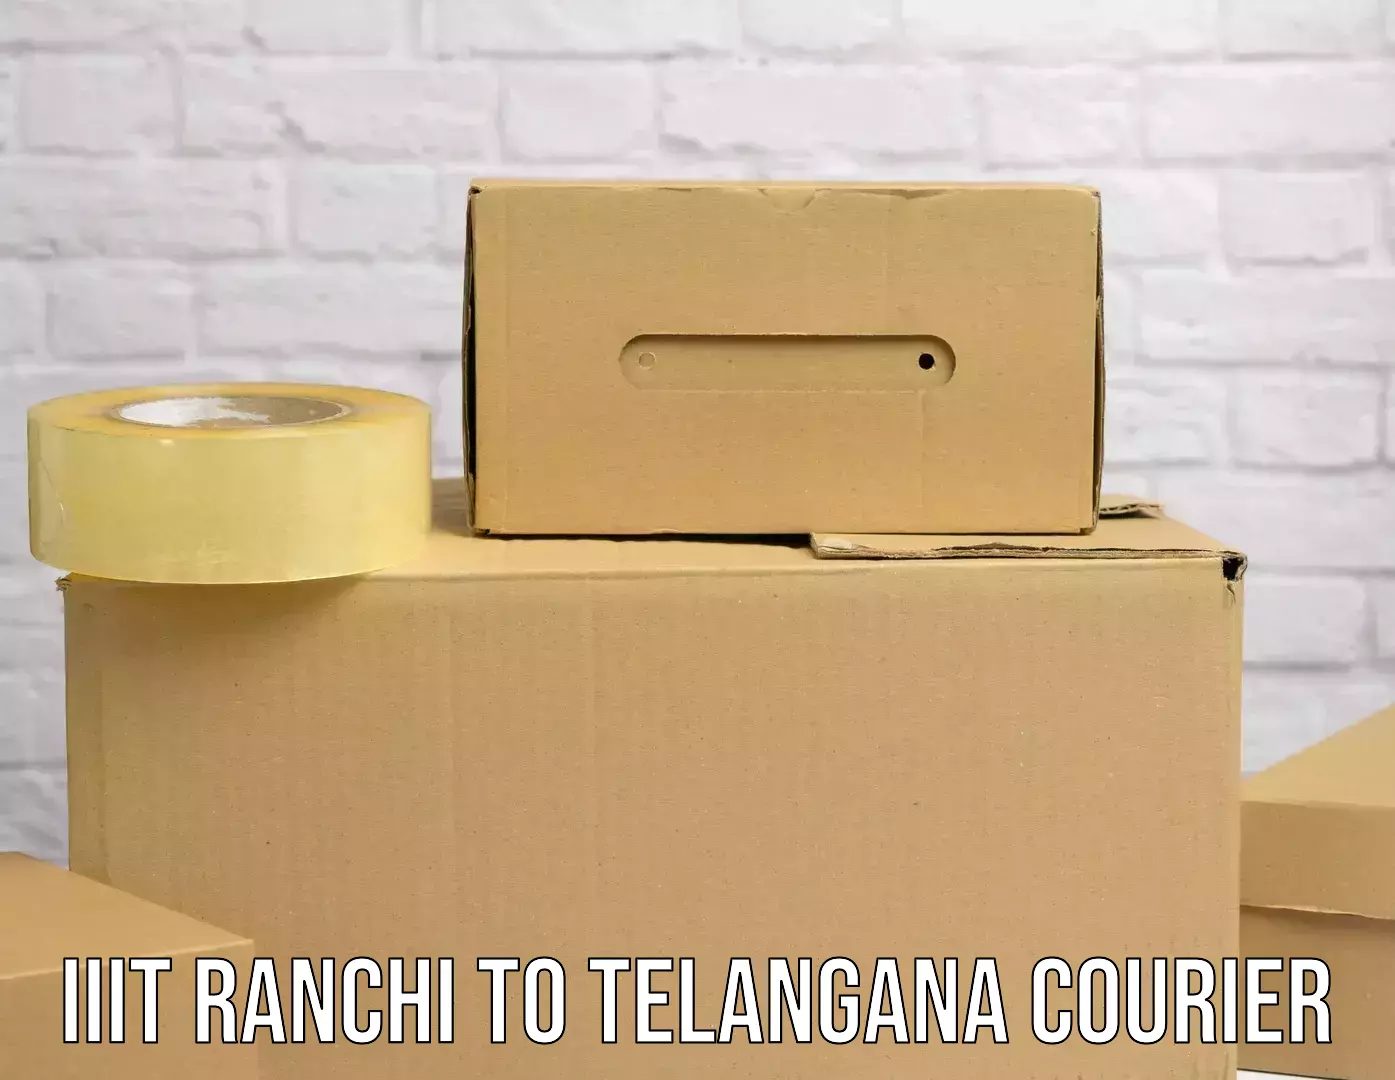 Local delivery service IIIT Ranchi to Bhainsa